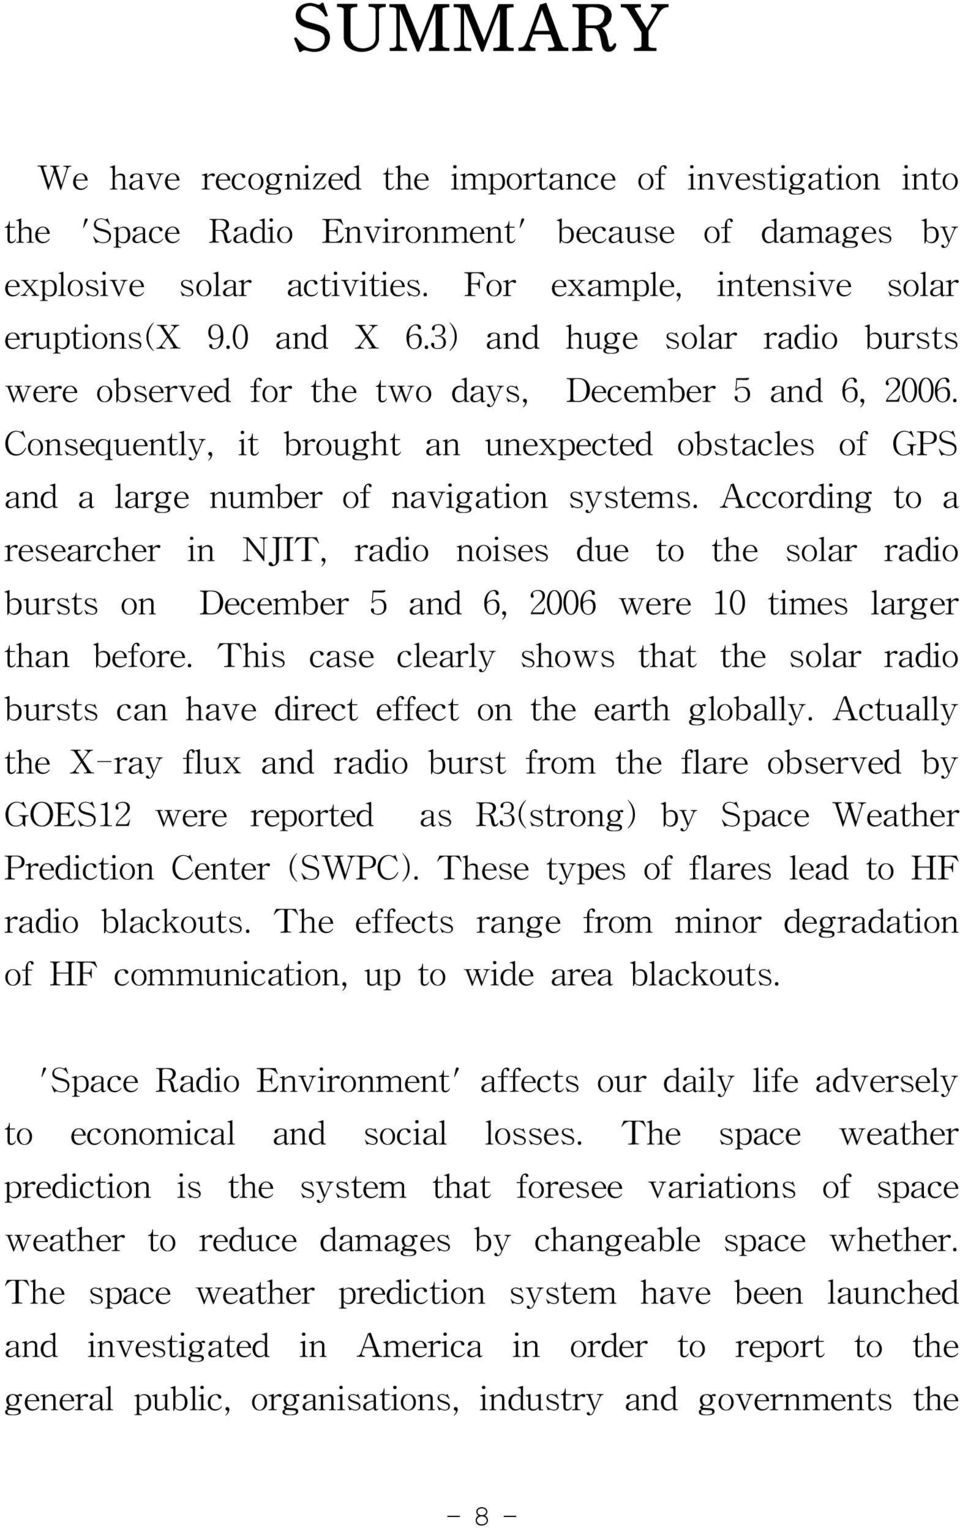 According to a researcher in NJIT, radio noises due to the solar radio bursts on December 5 and 6, 2006 were 10 times larger than before.